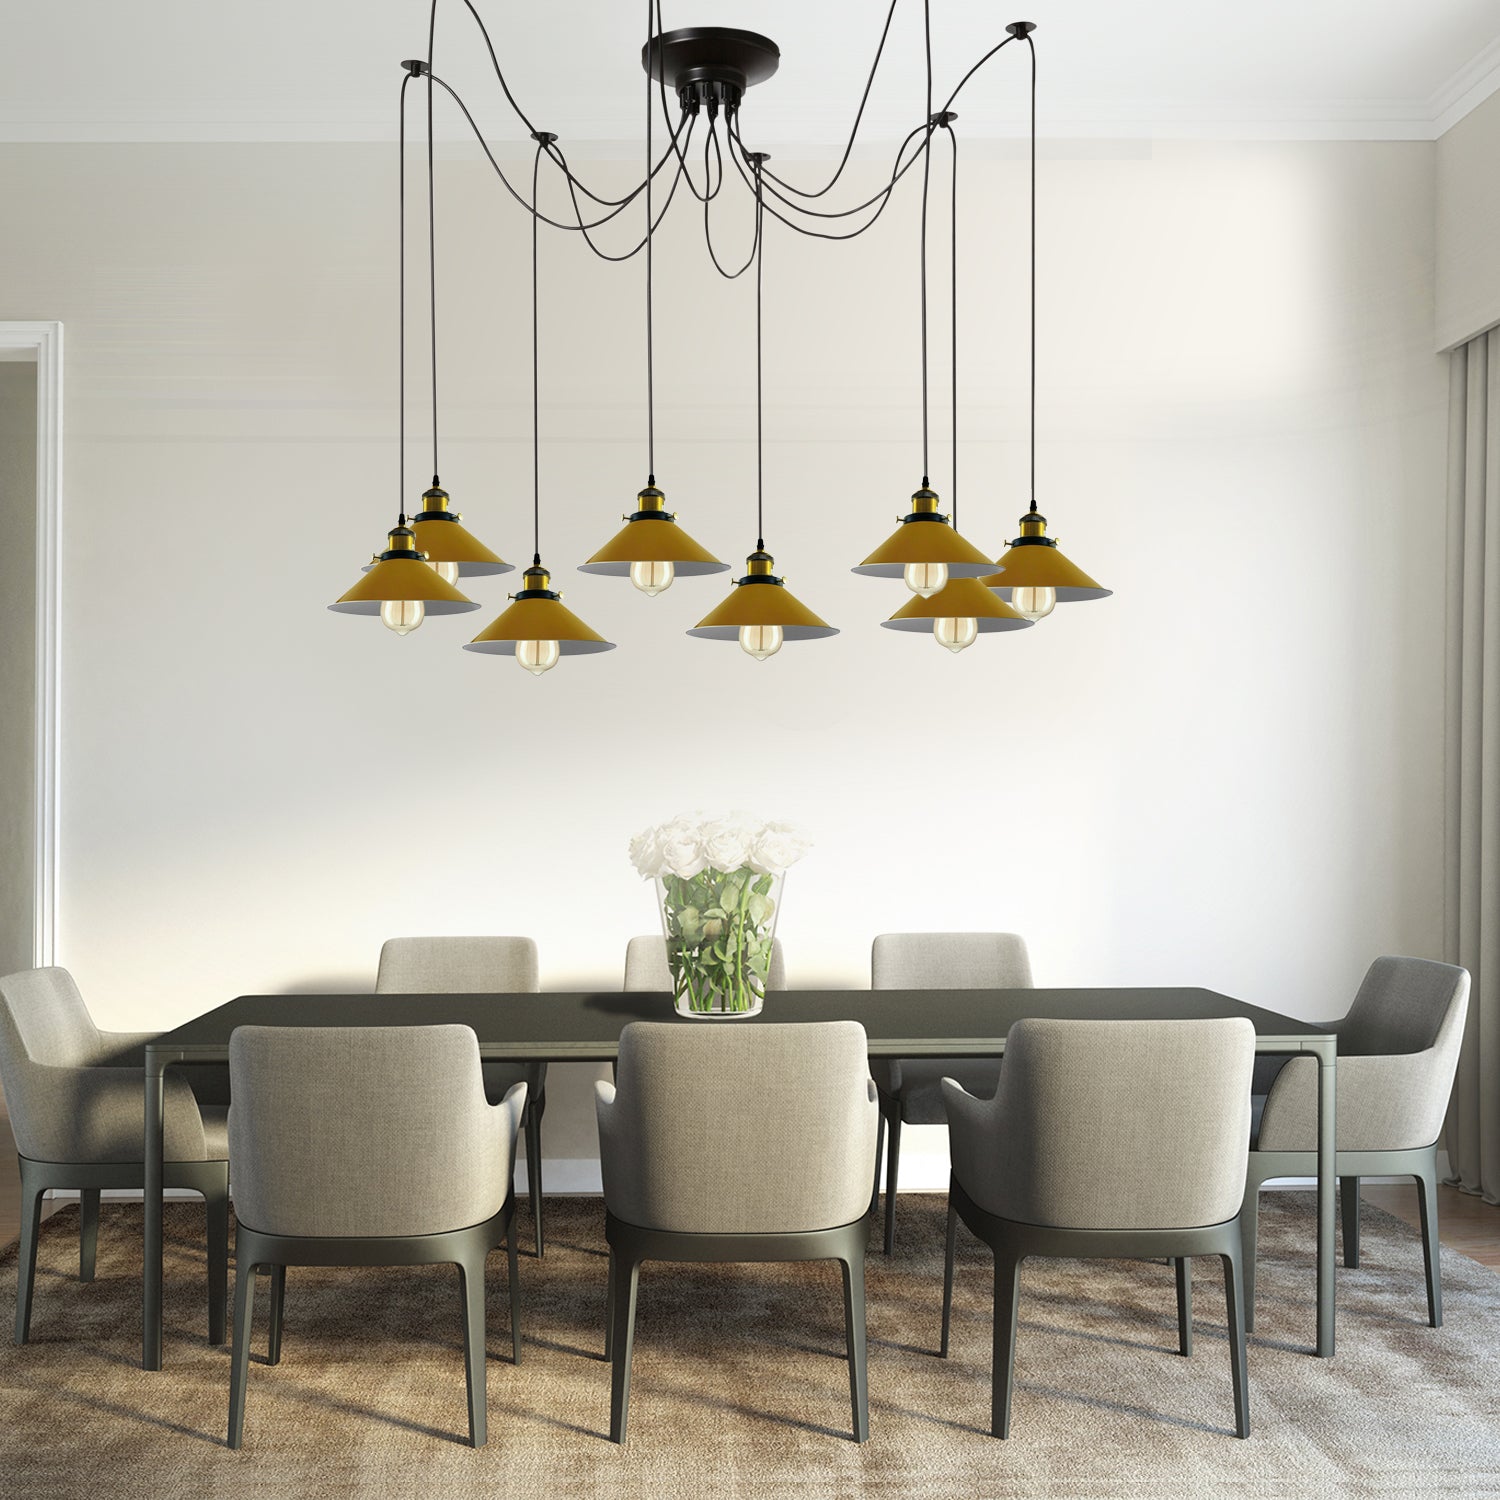 Modern large spider Braided Pendant lamp 8heads Clusters of Hanging Yellow Cone Shades Ceiling Lamp Lighting~3437 - LEDSone UK Ltd